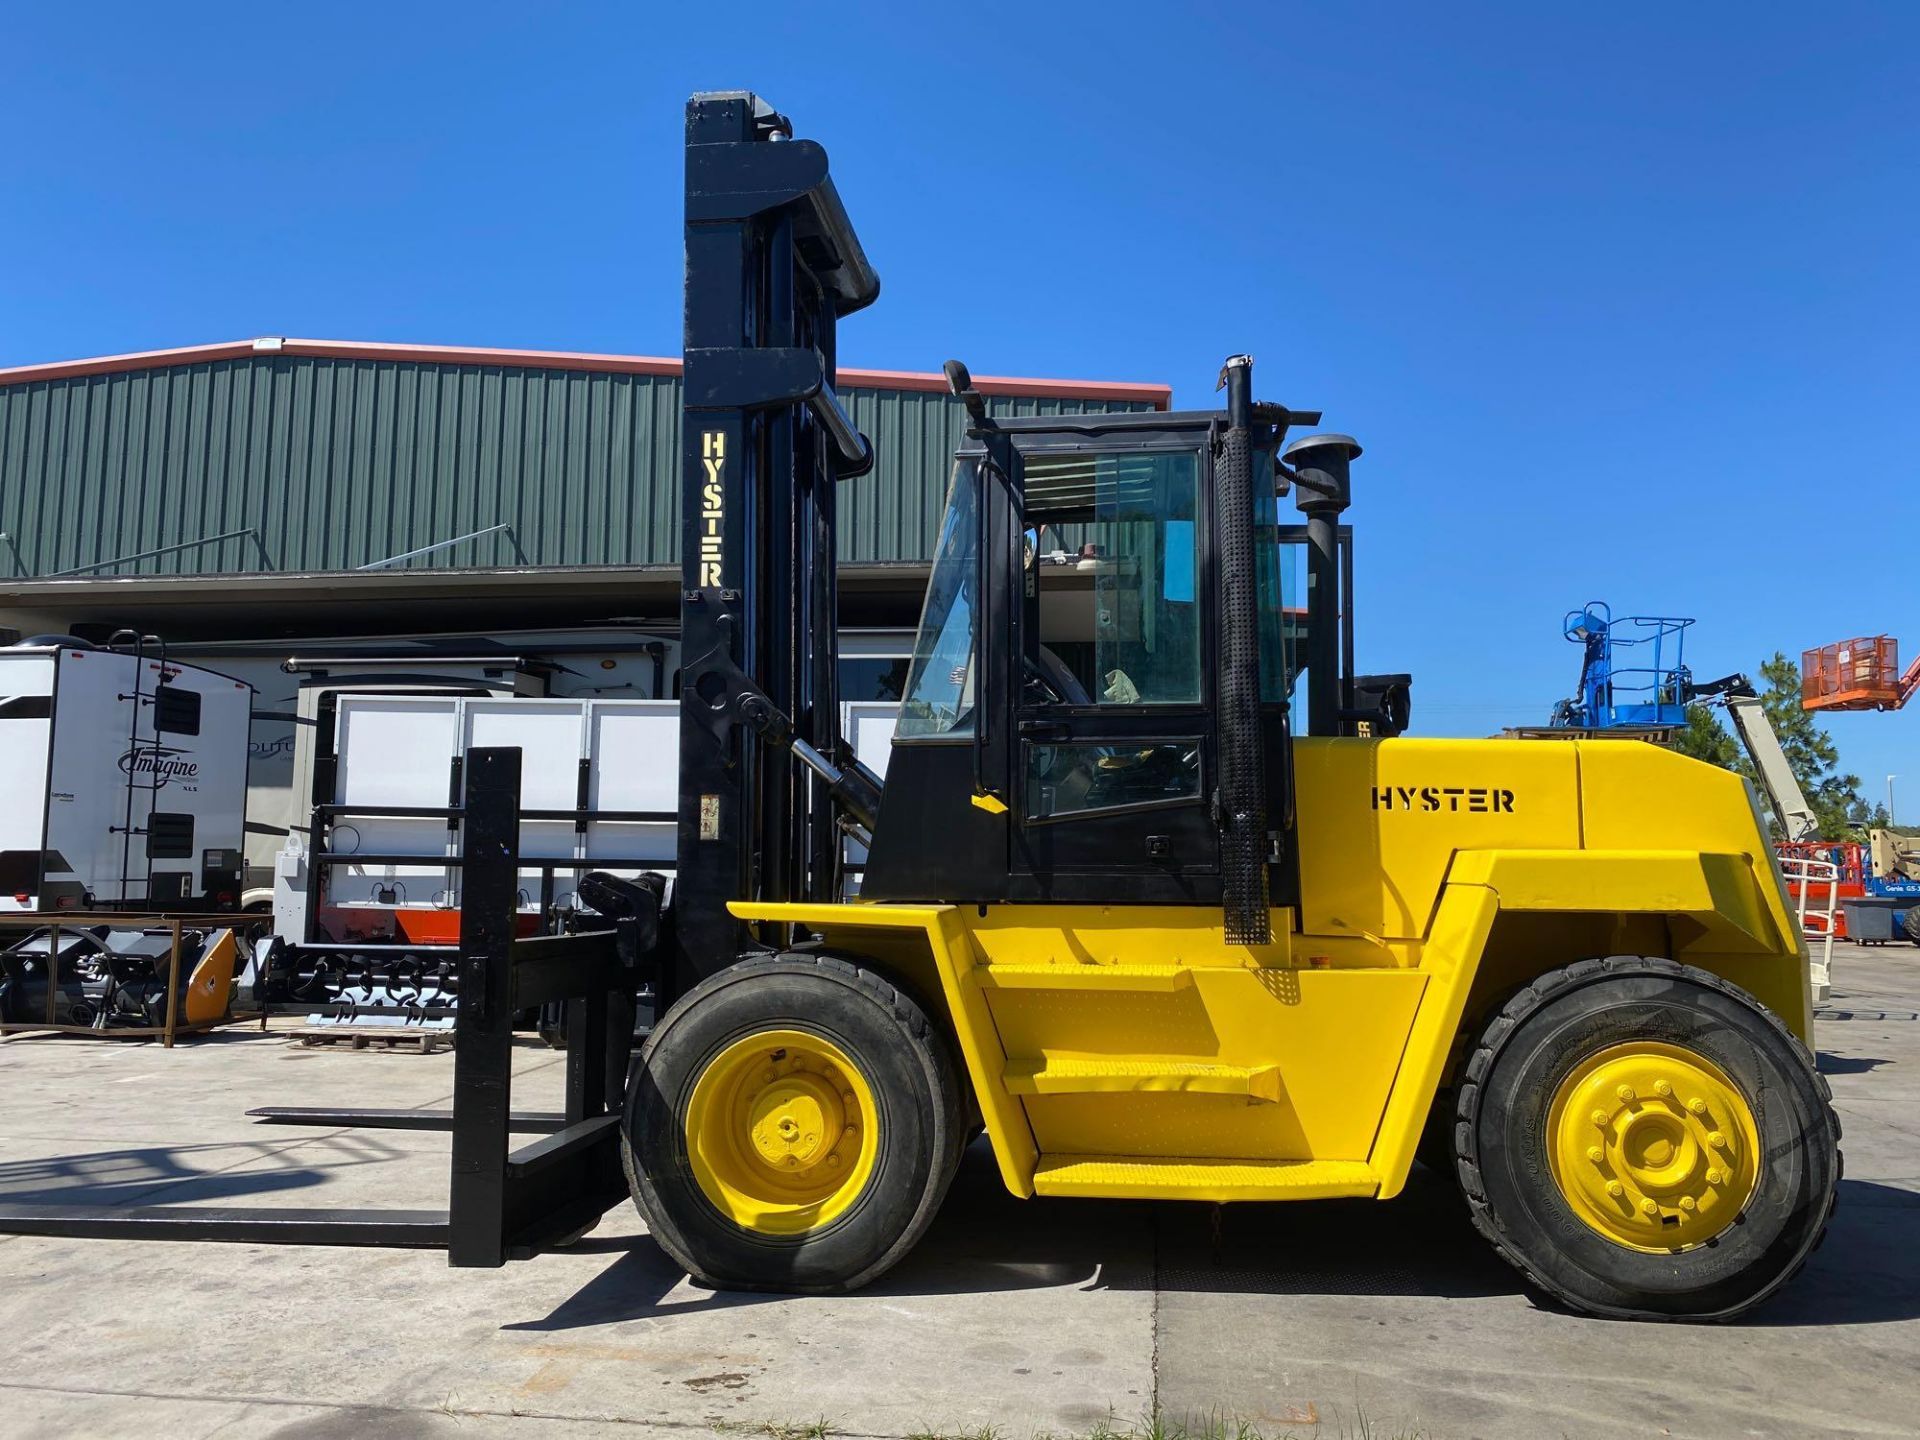 HYSTER DIESEL FORKLIFT MODEL H190XL2, APPROX. 19,000 LB CAPACITY, 212.6" HEIGHT CAPACITY, RUNS AND O - Image 2 of 12